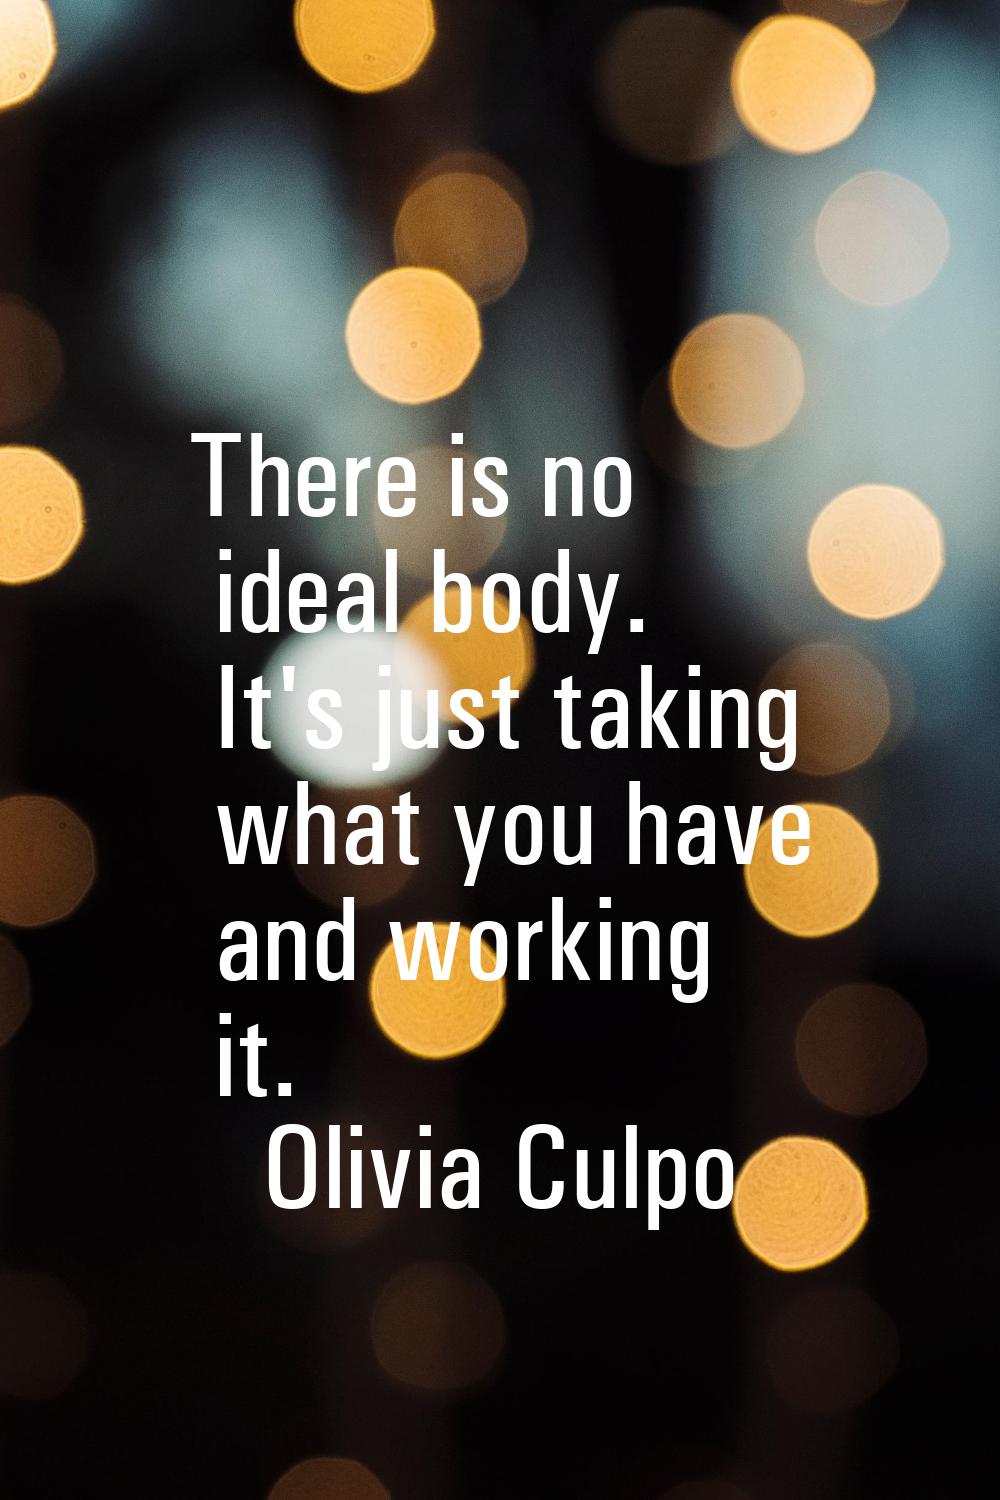 There is no ideal body. It's just taking what you have and working it.